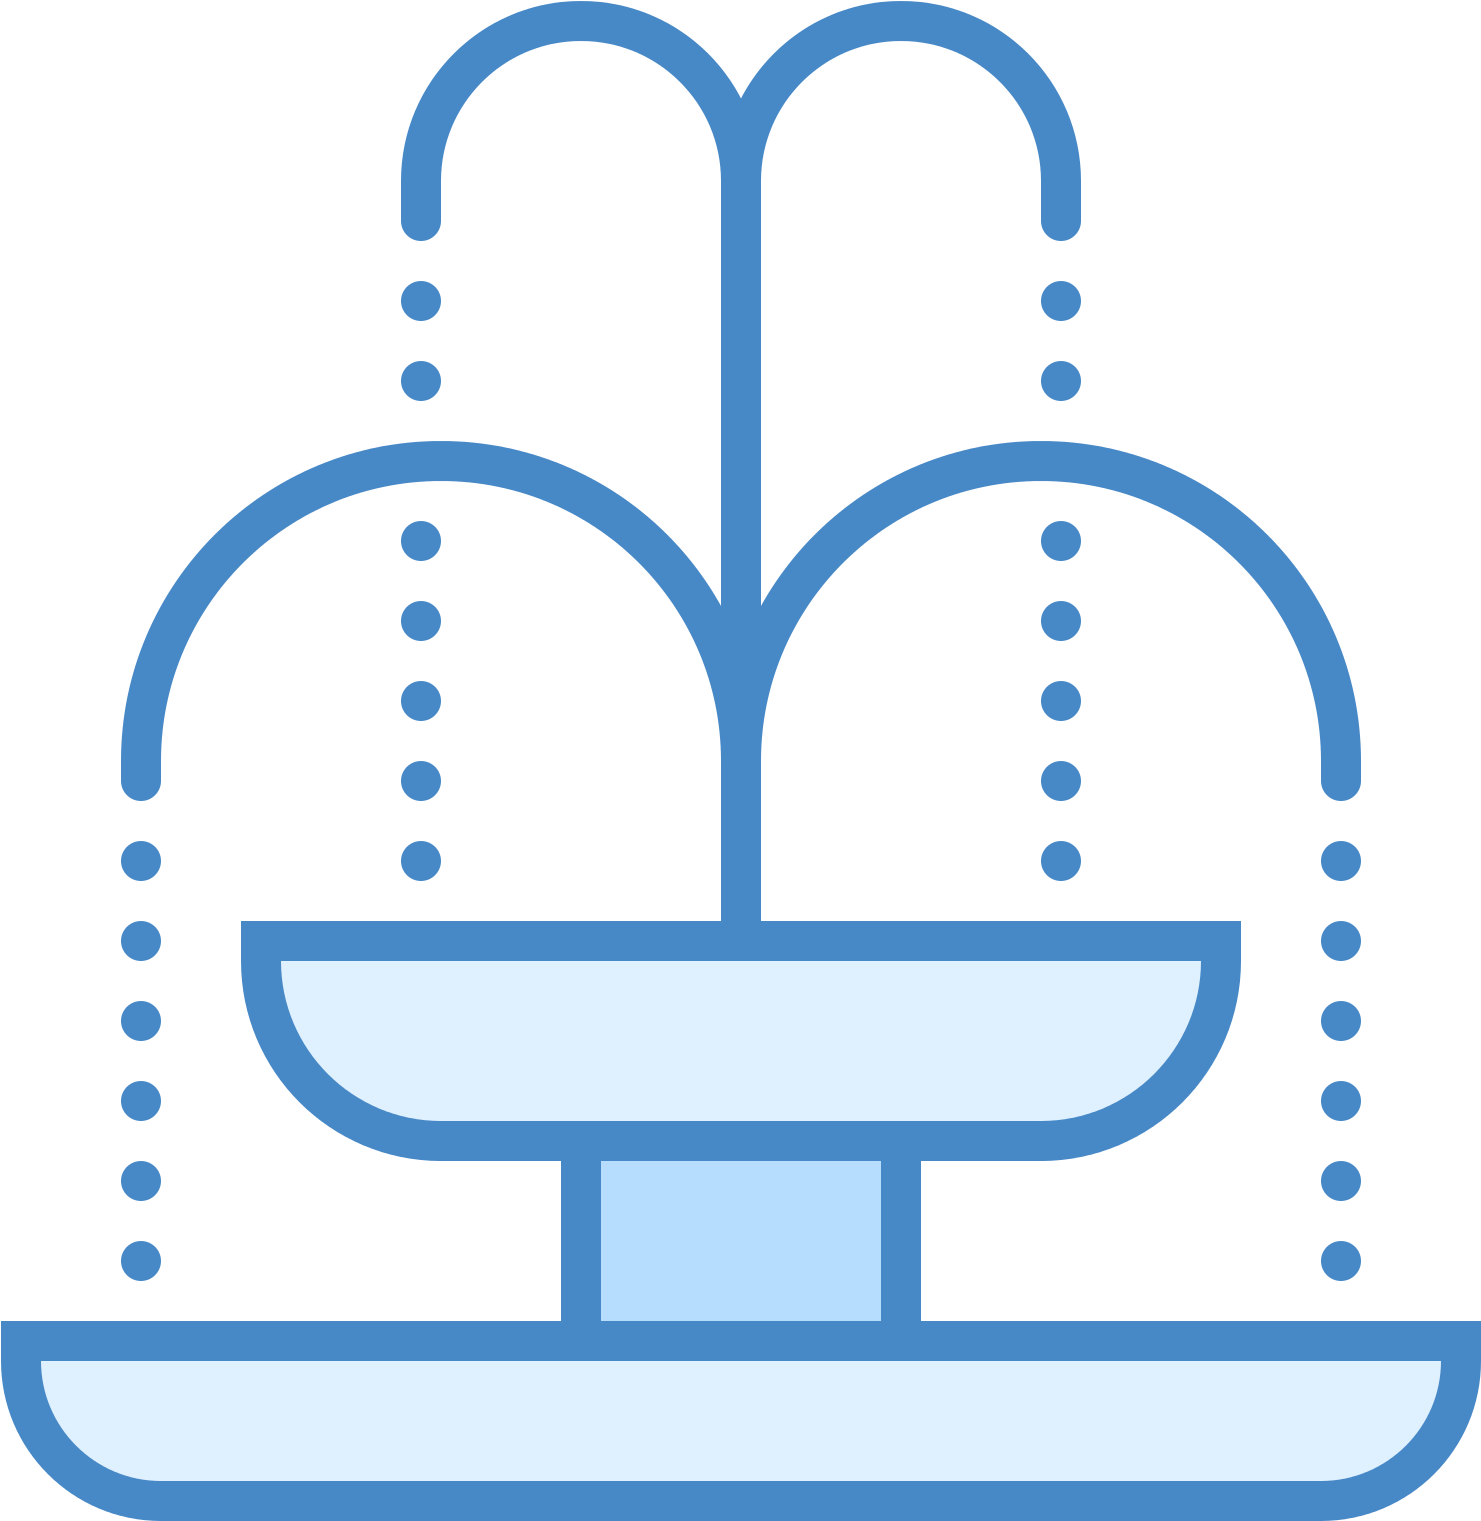 Iconic Blue Fountain Graphic